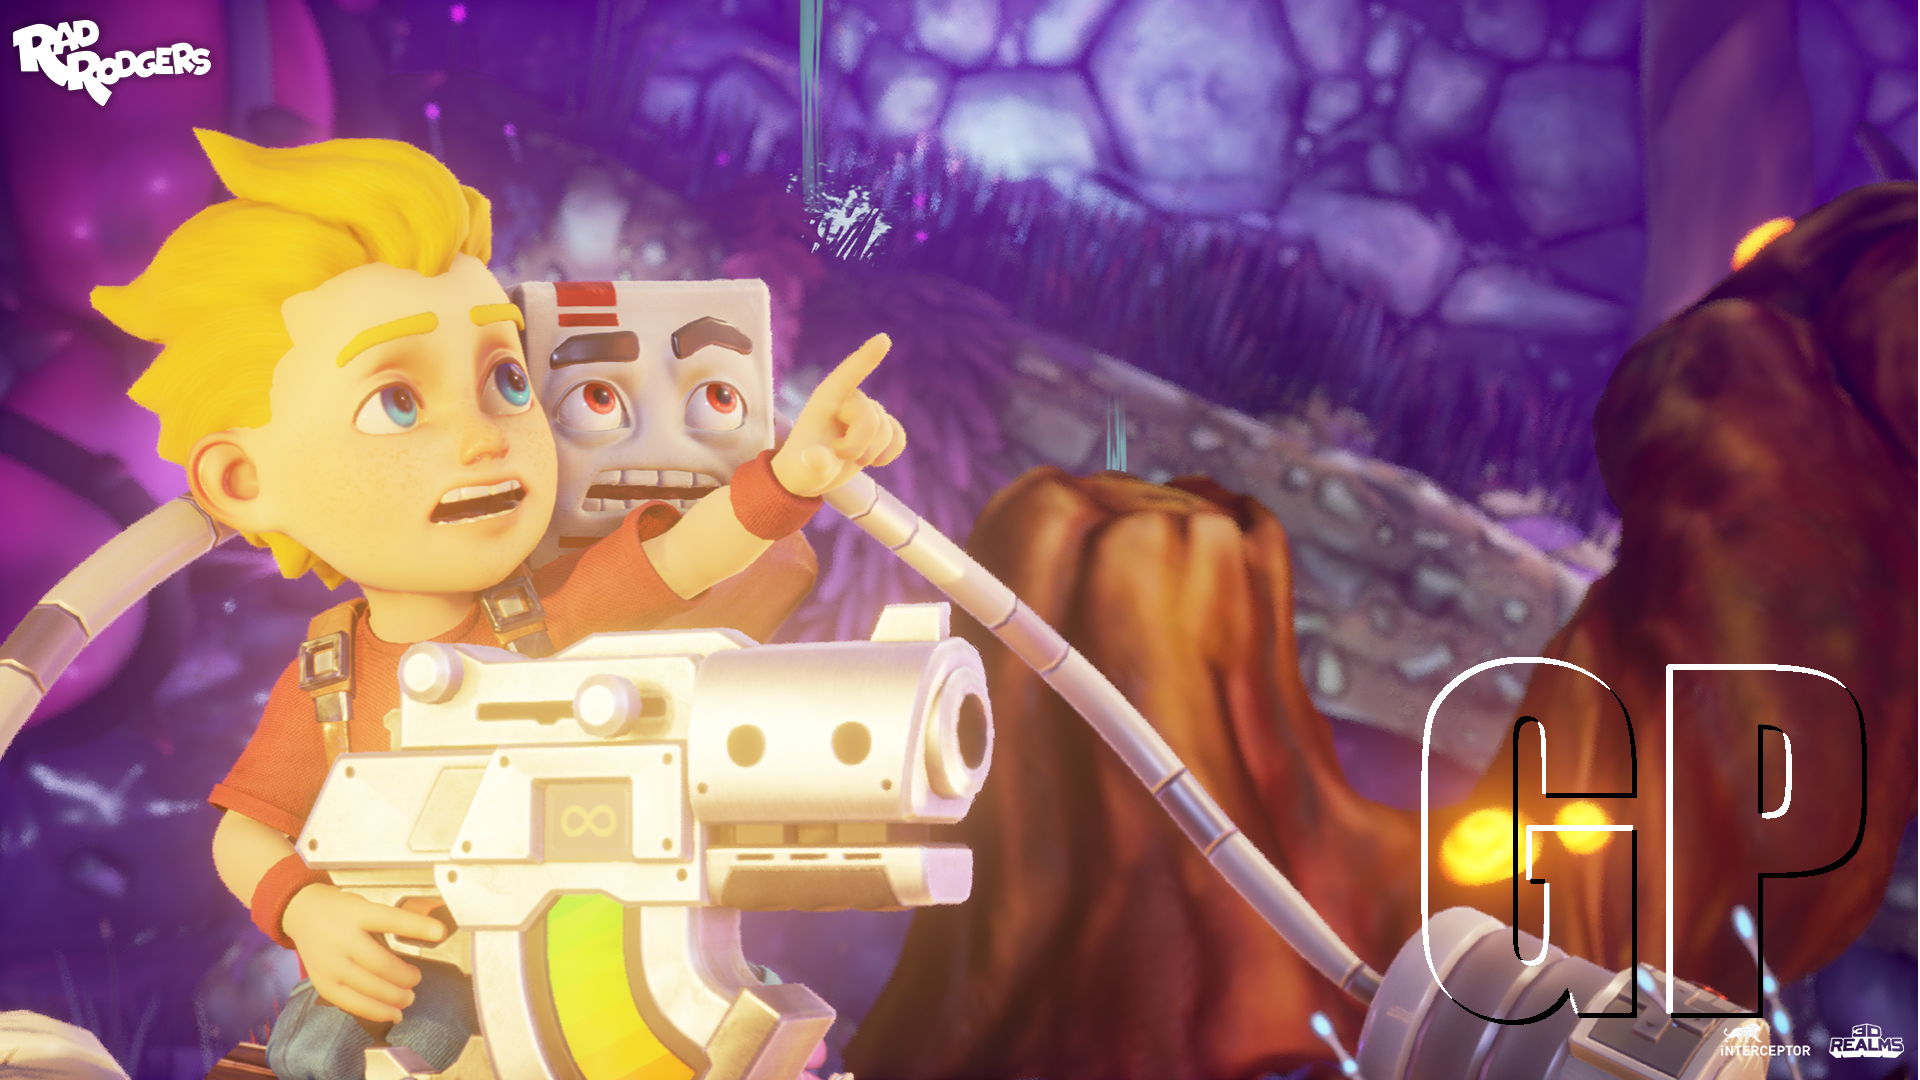 Foul-Mouthed Platformer 'Rad Rodgers' Announced for PS4 and PC, Kickstarter Goes Live